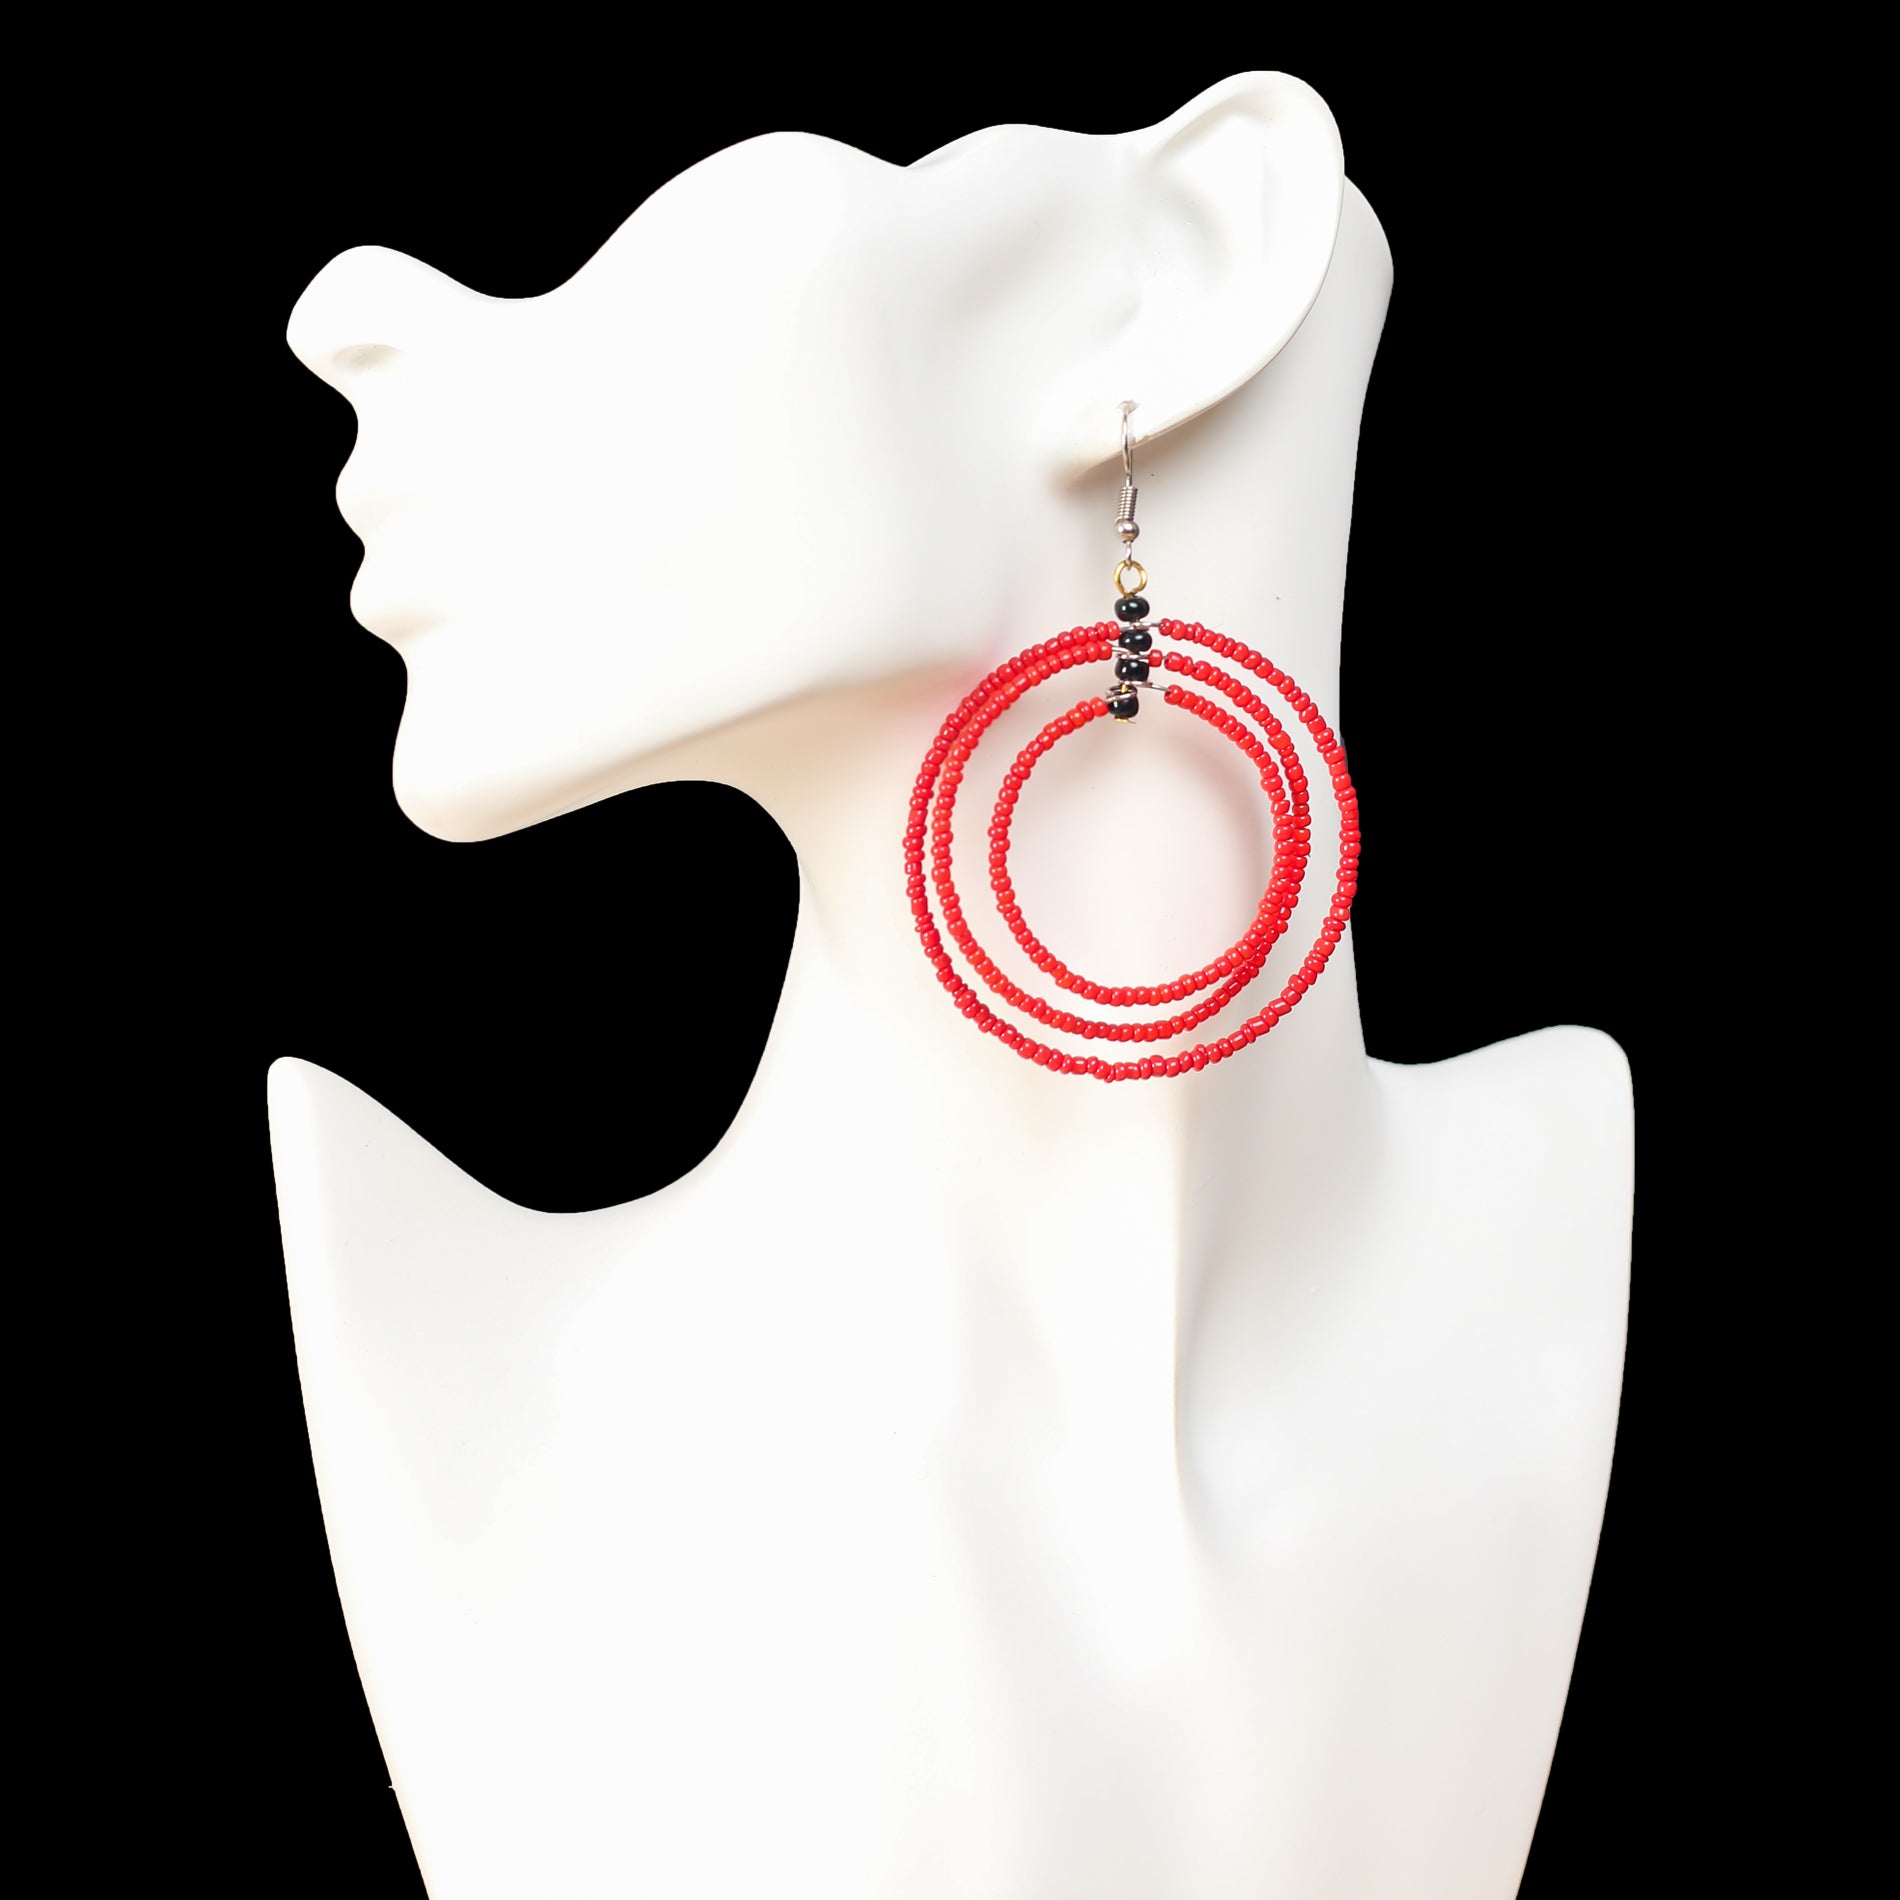 Hoop Earrings made with red beads. They have 3 circles